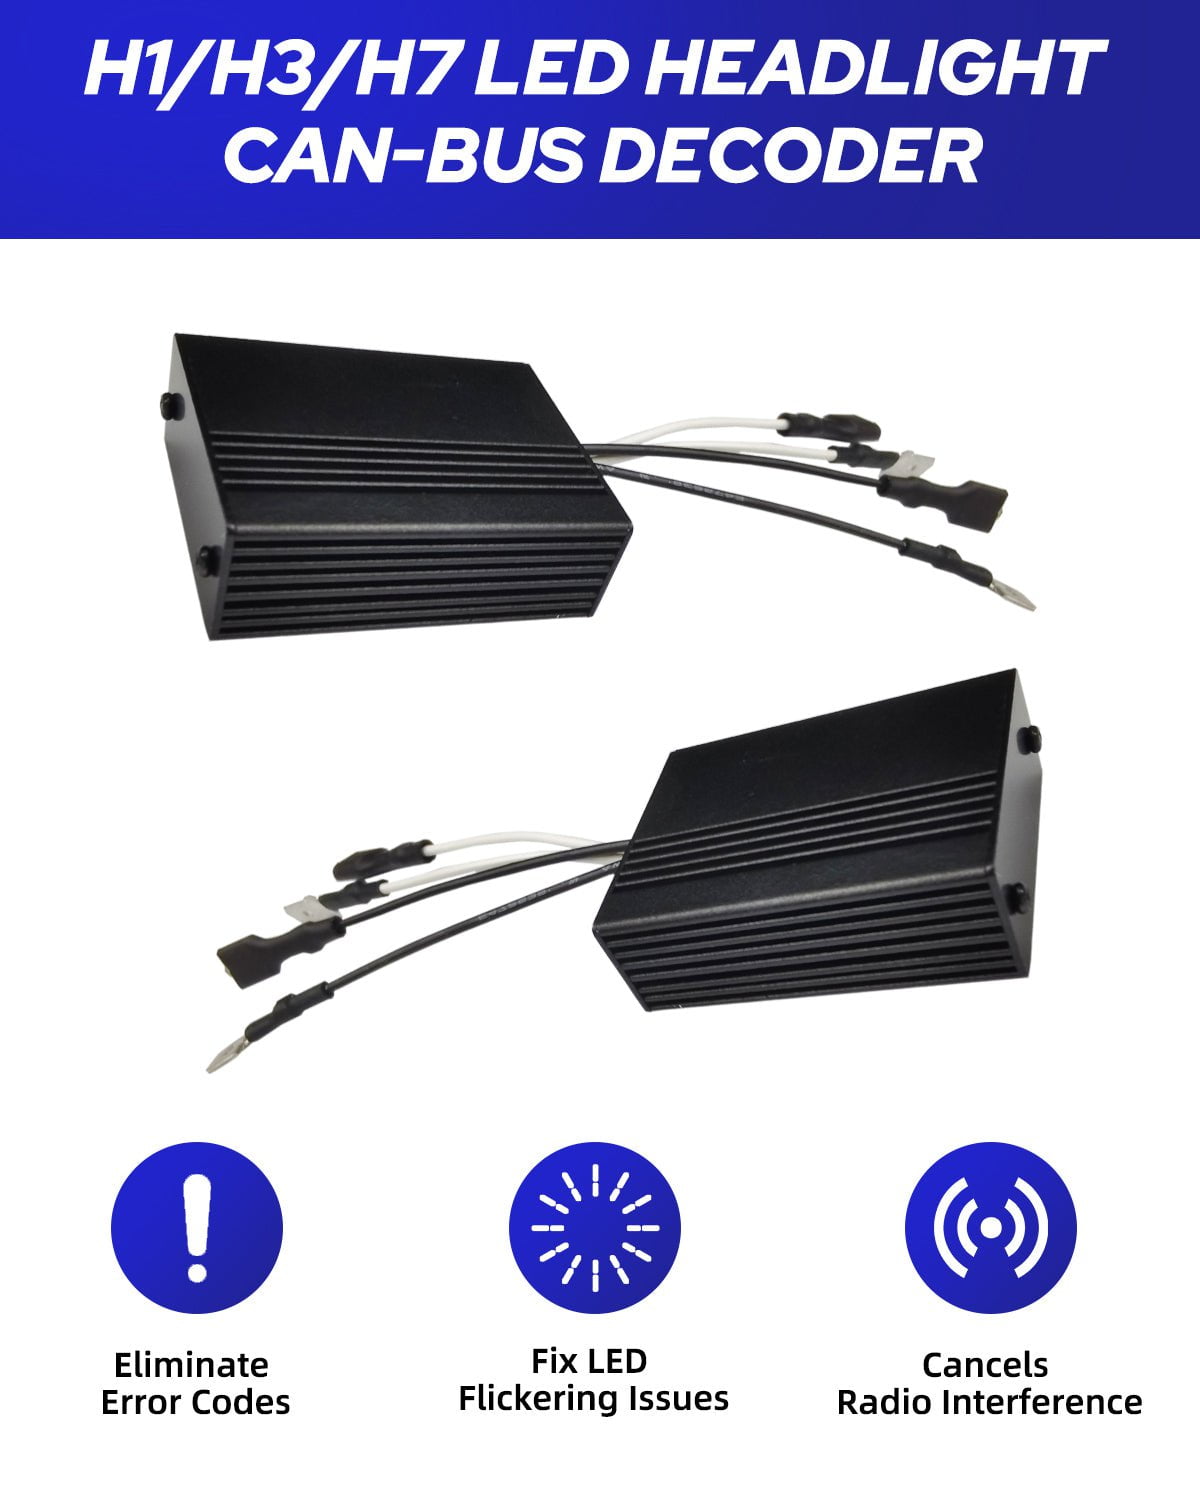 Autoone Canbus Decoder H7 Canbus Decoder For LED Headlights